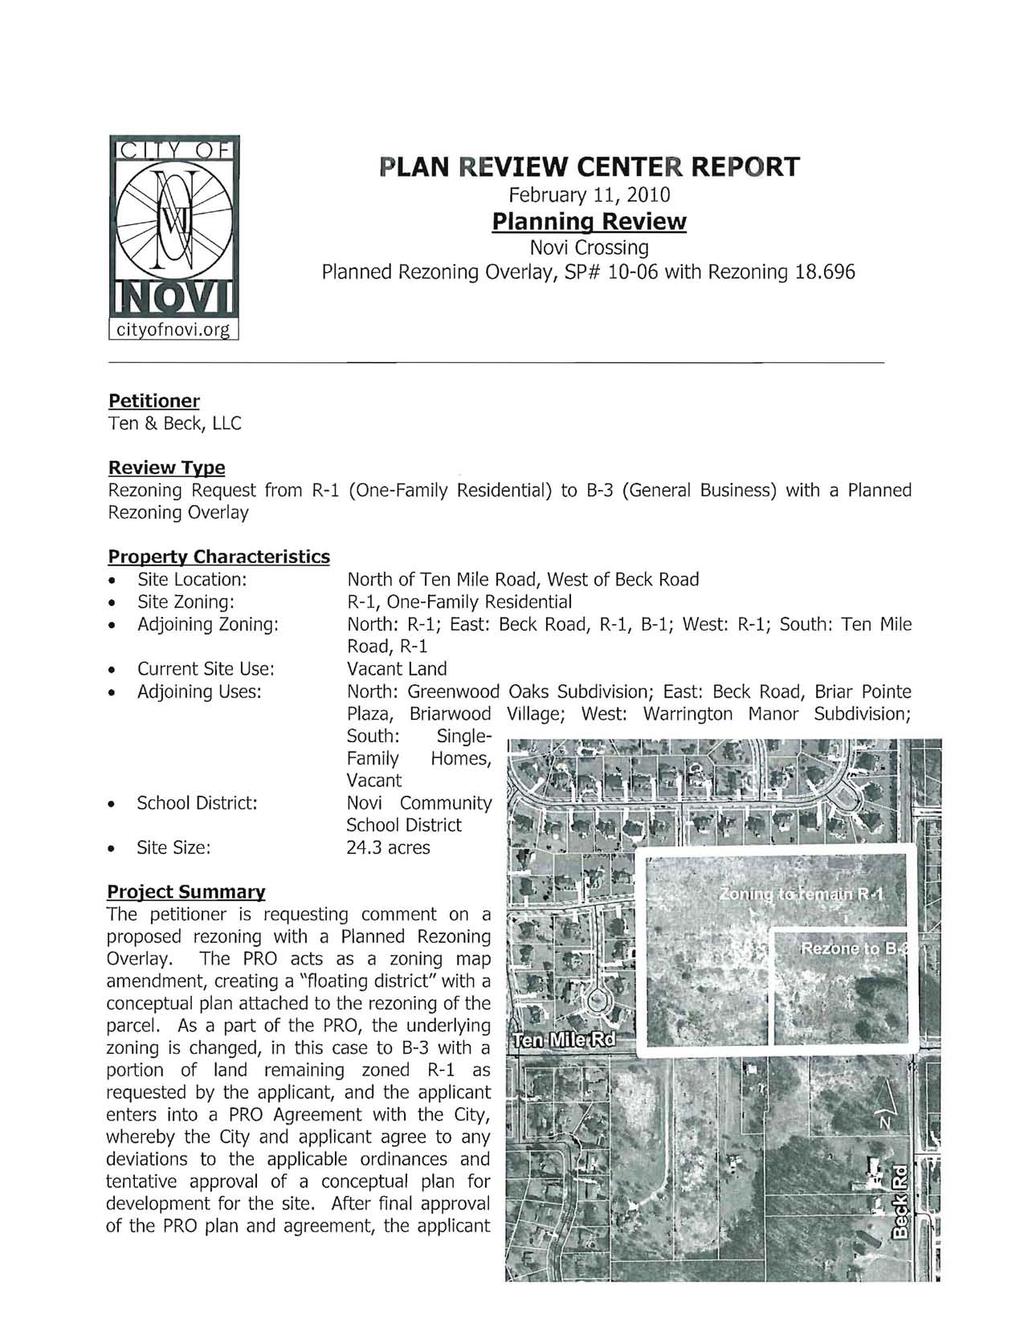 PLAN REVIEW CENTER REPORT February 11, 2010 Planning Review Novi Crossing Planned Rezoning Overlay, SP# 10-06 with Rezoning 18.